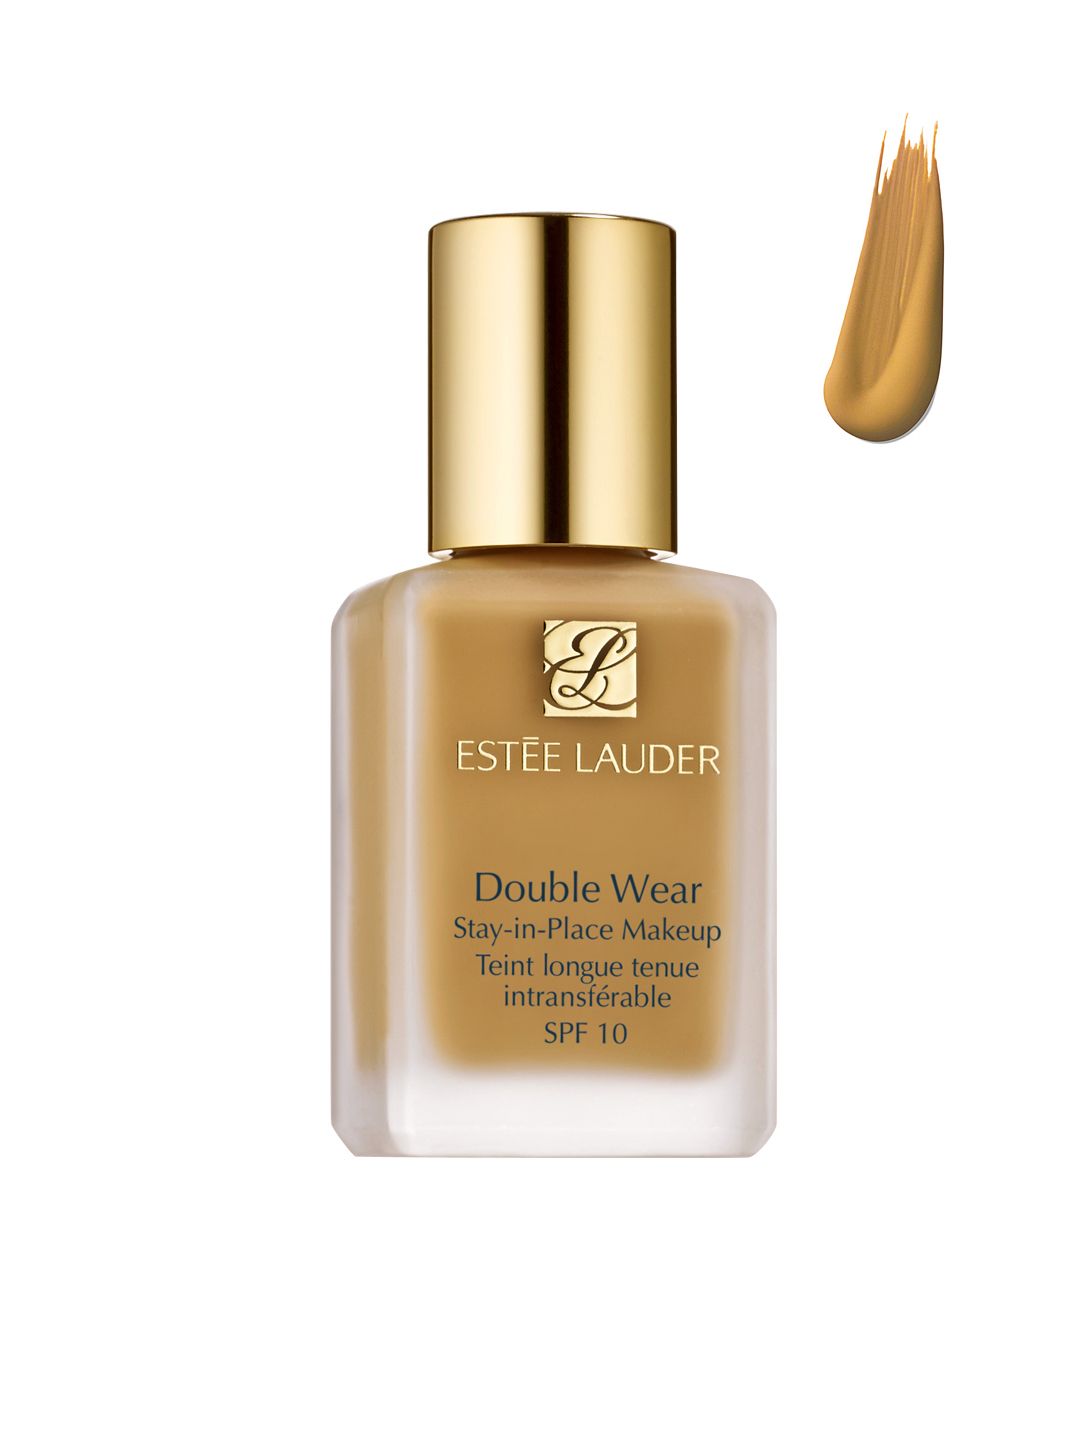 Estee Lauder Double Wear Stay-In-Place Makeup Foundation with SPF 10 - Rattan Price in India